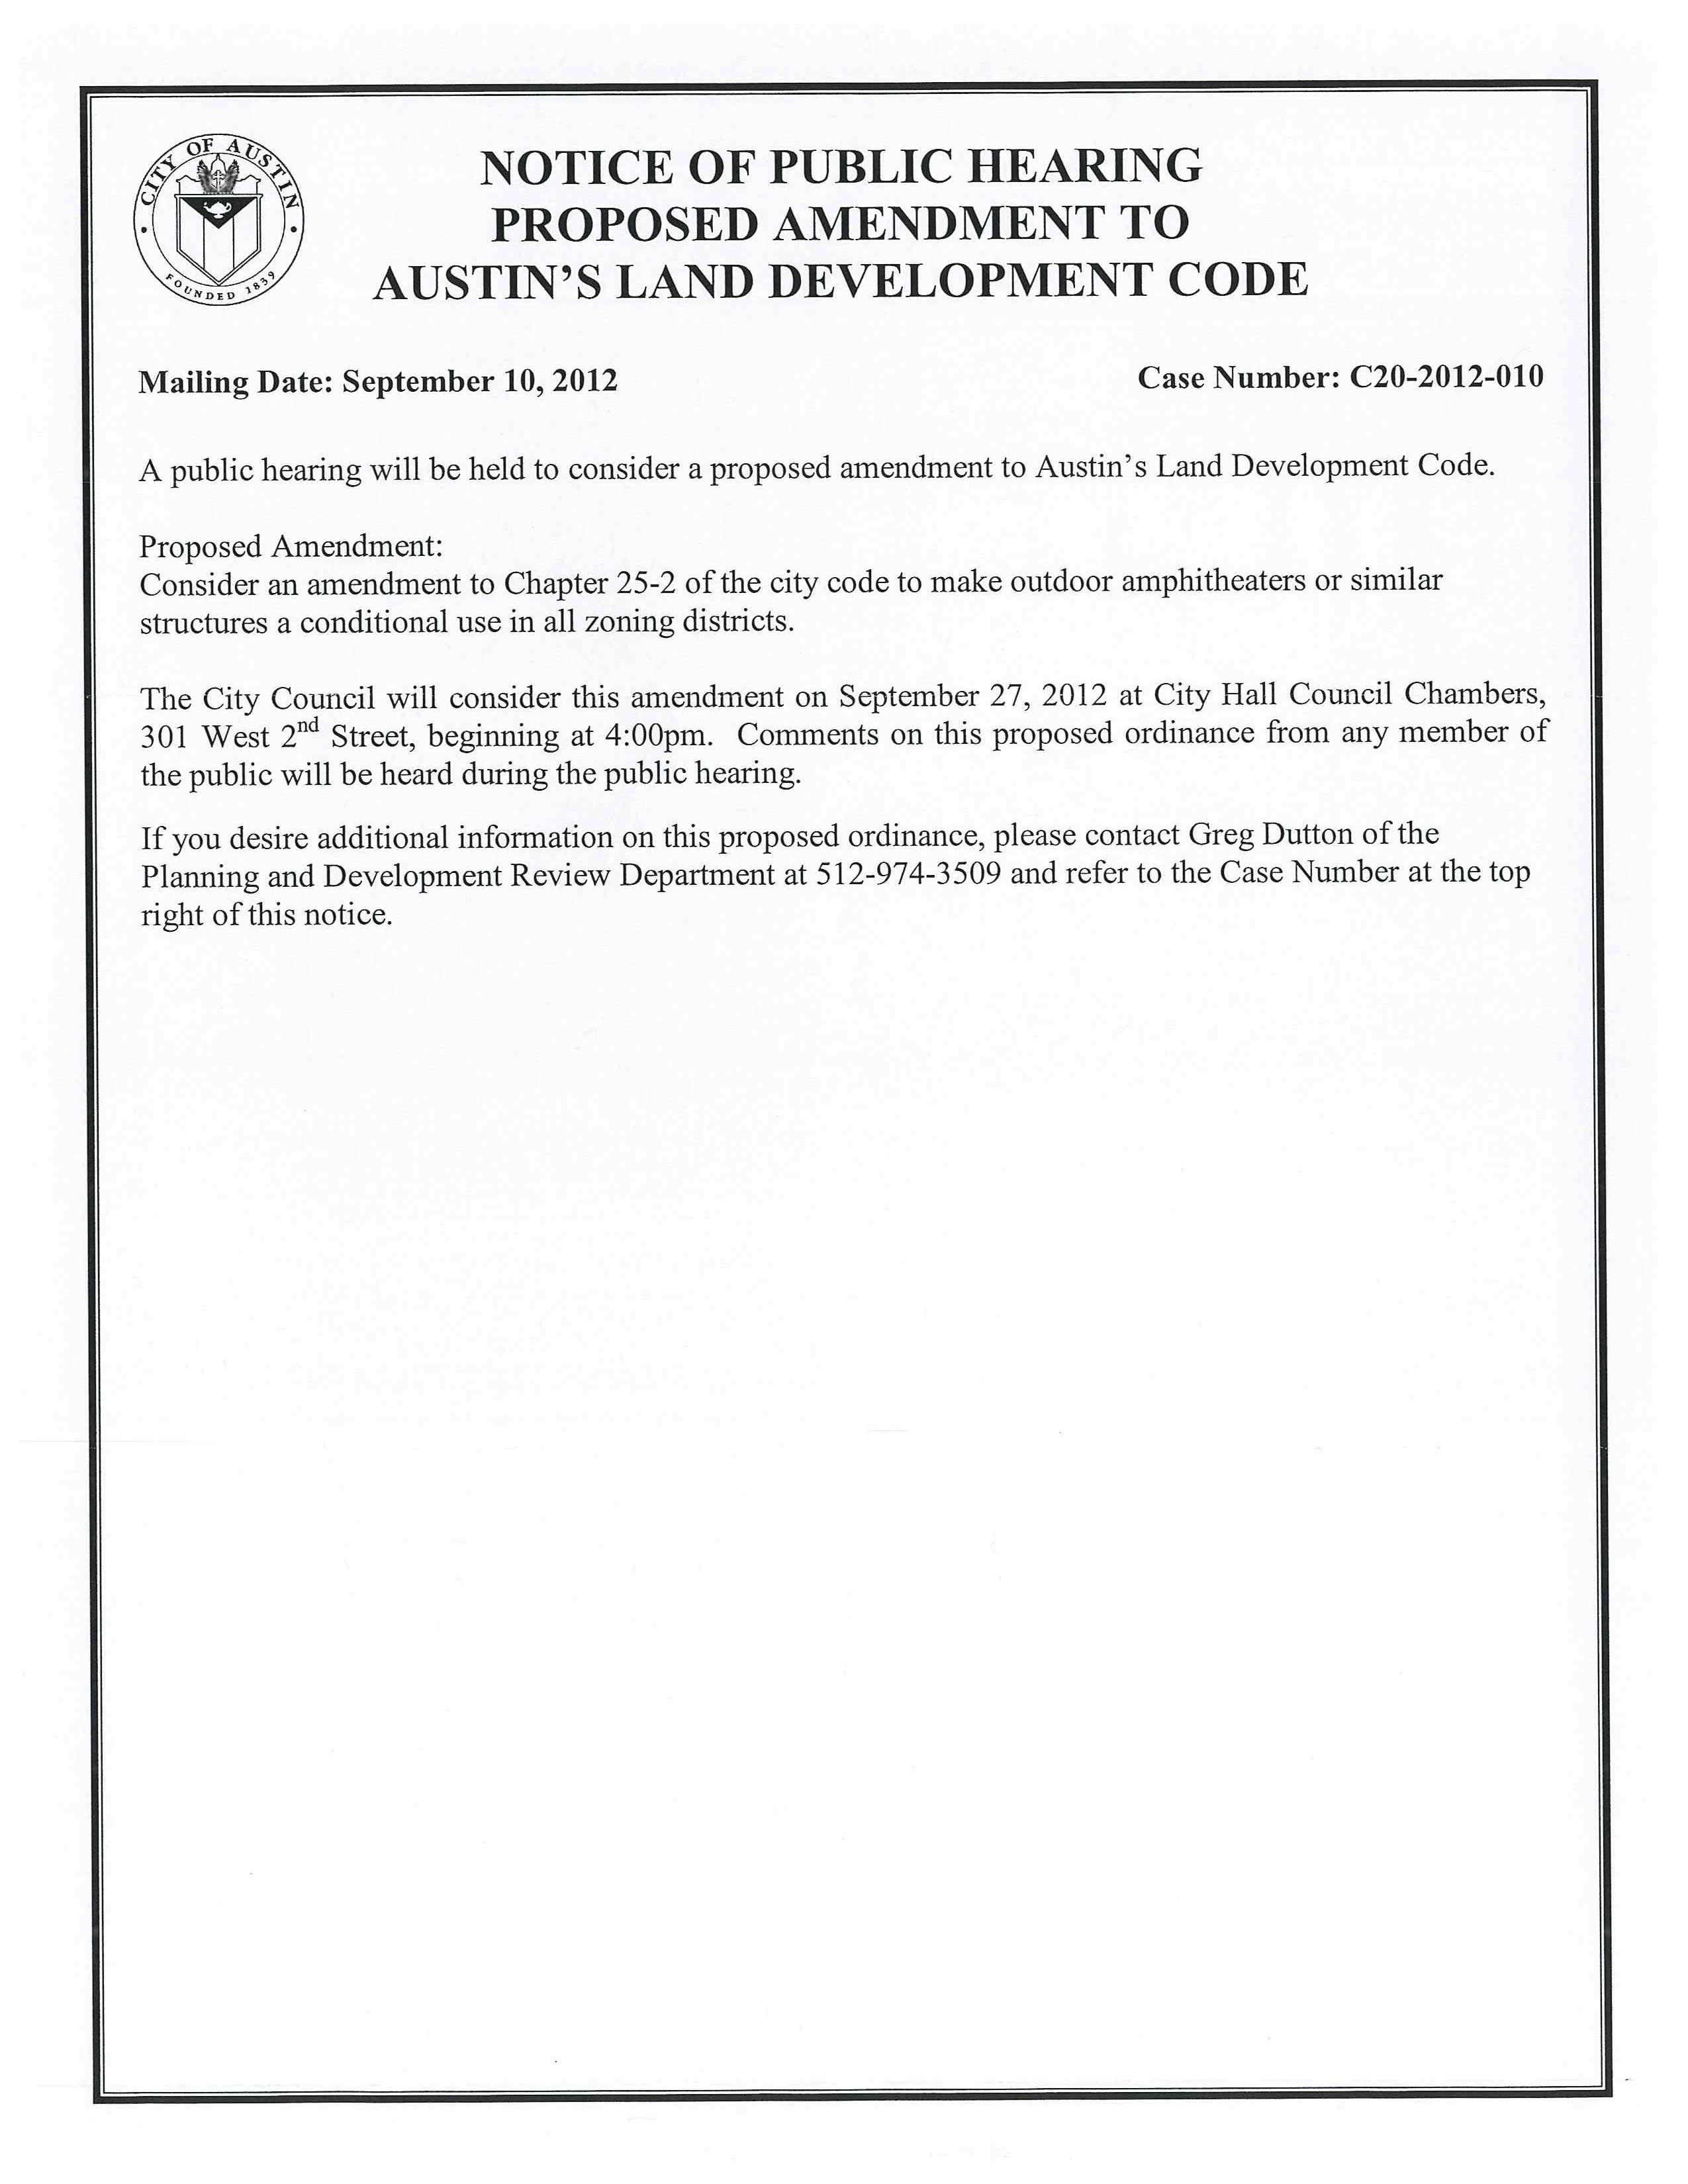 Meeting Notice - Proposed Amendment to City Code to make outdoor amphitheaters or similar structures conditional use